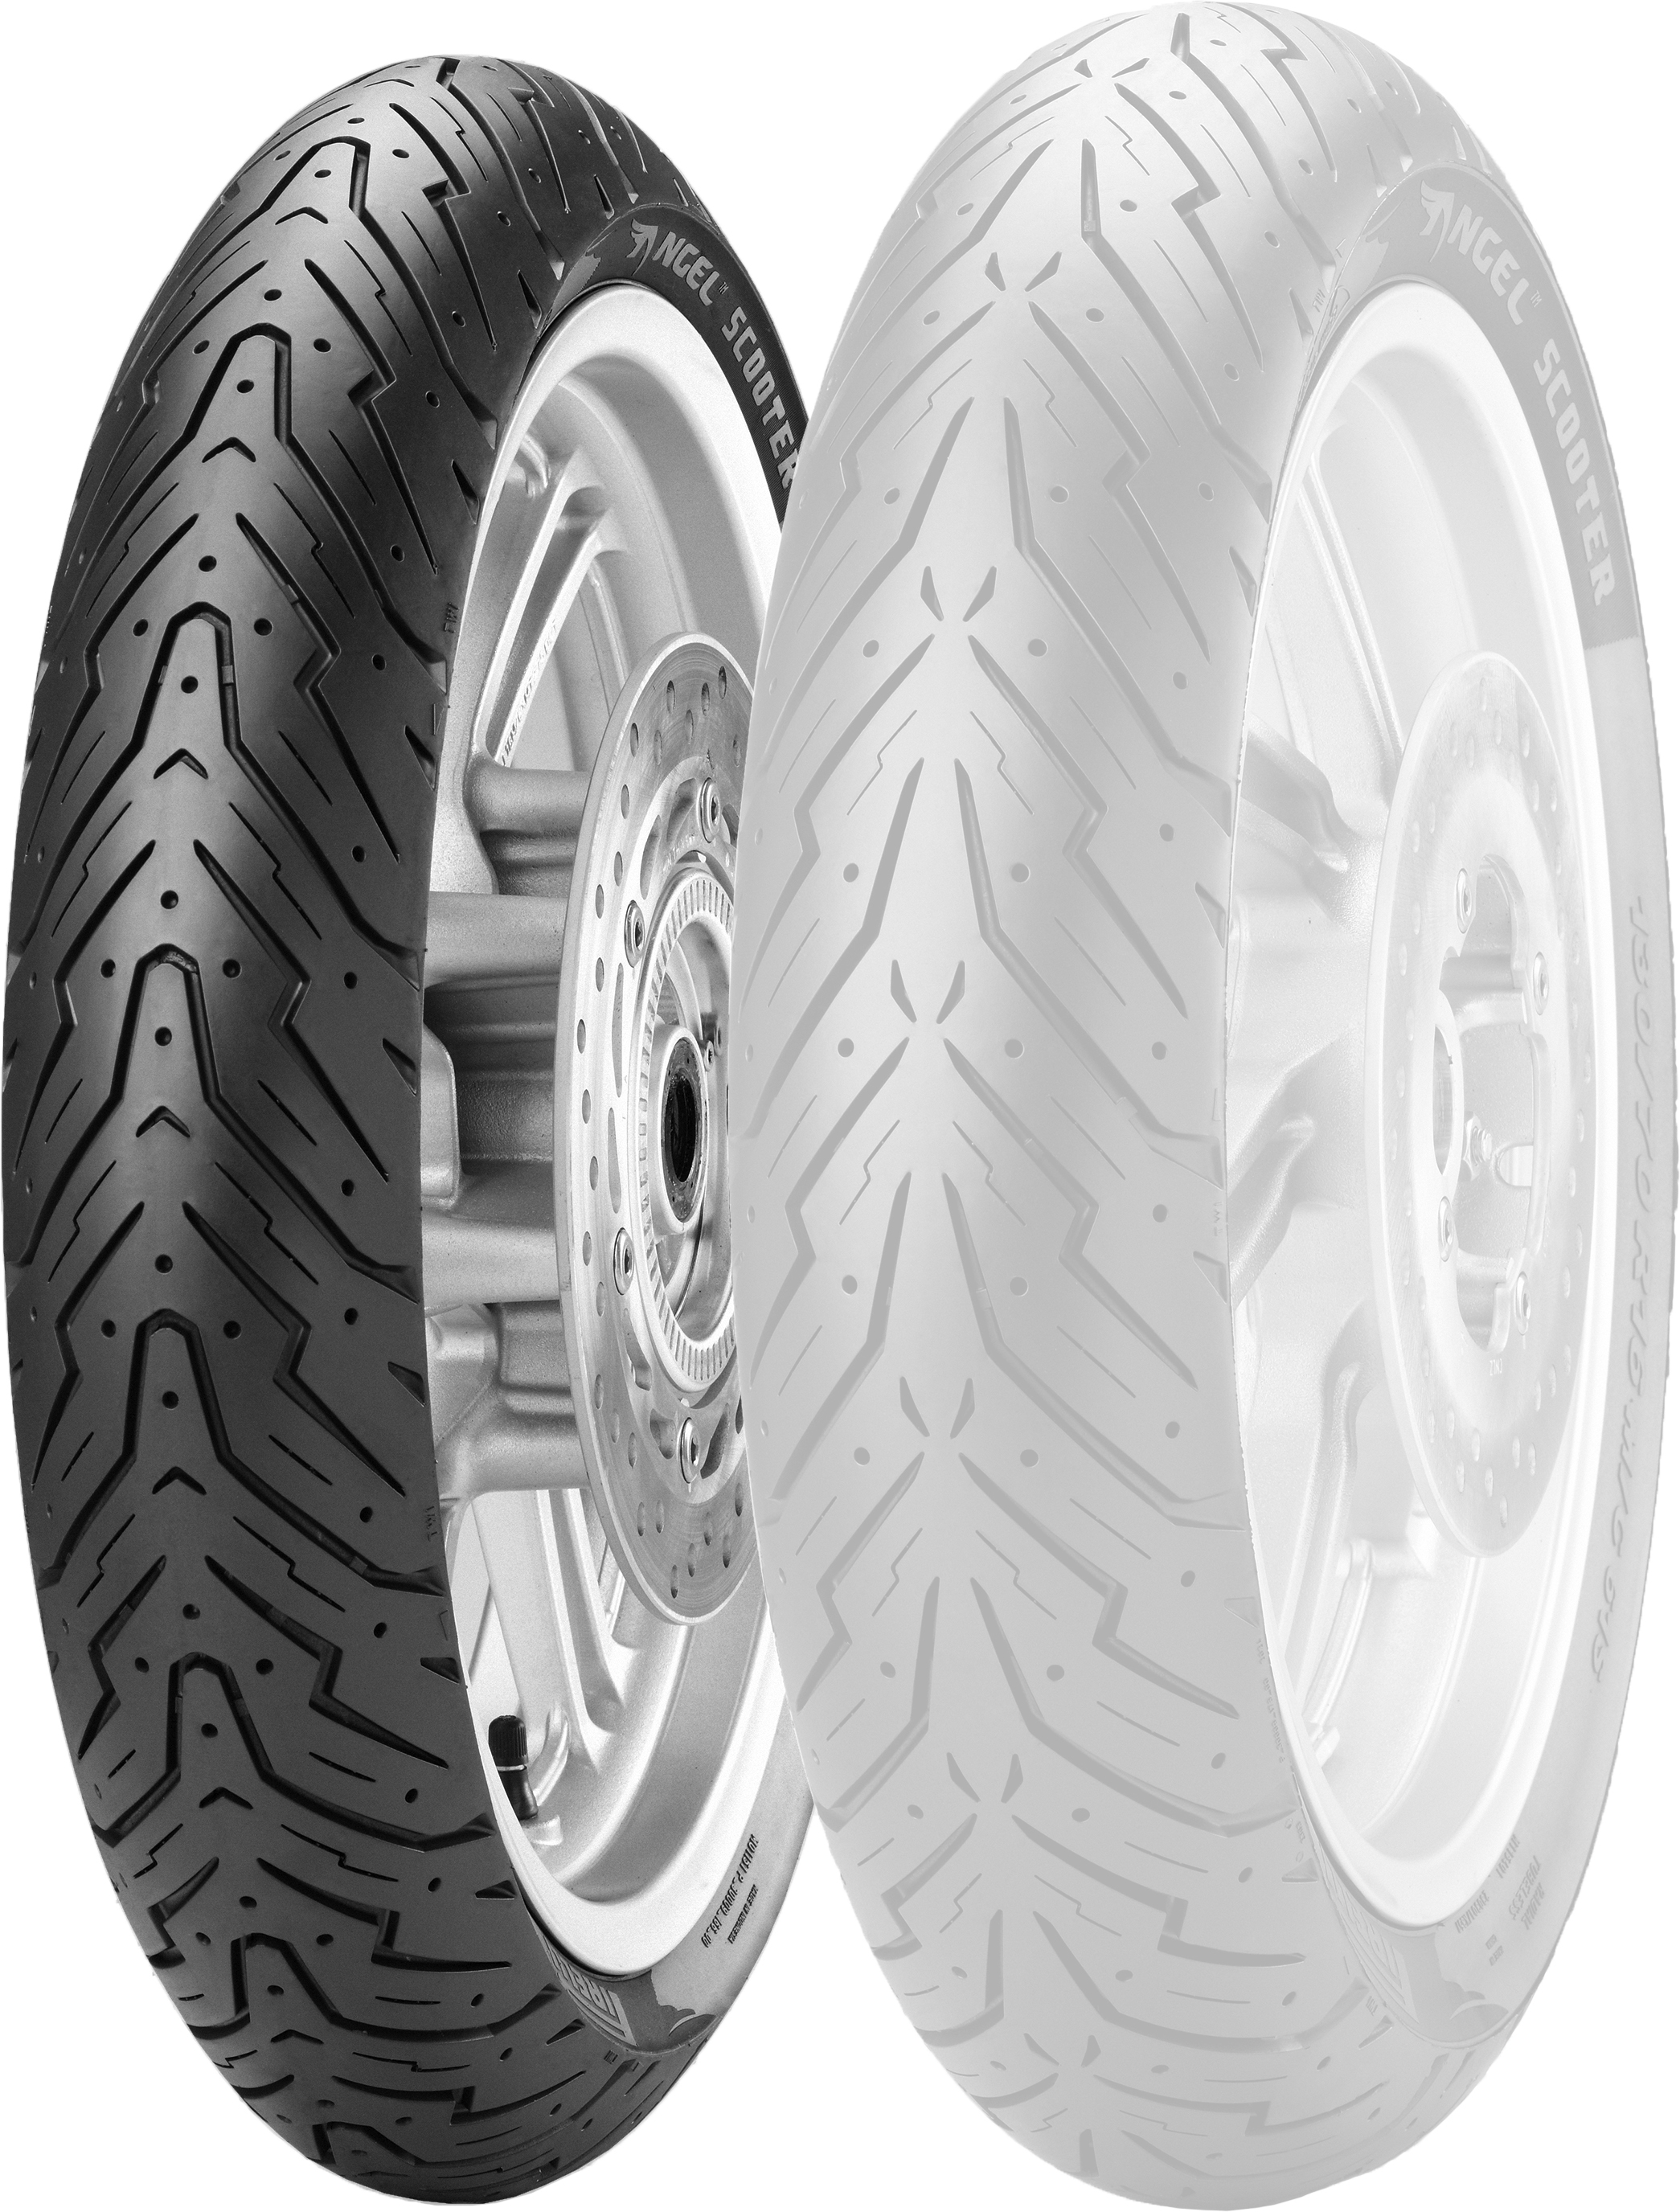 Pirelli - Tire Angel Scooter Front 110/70-12 47p Bias - 2769500